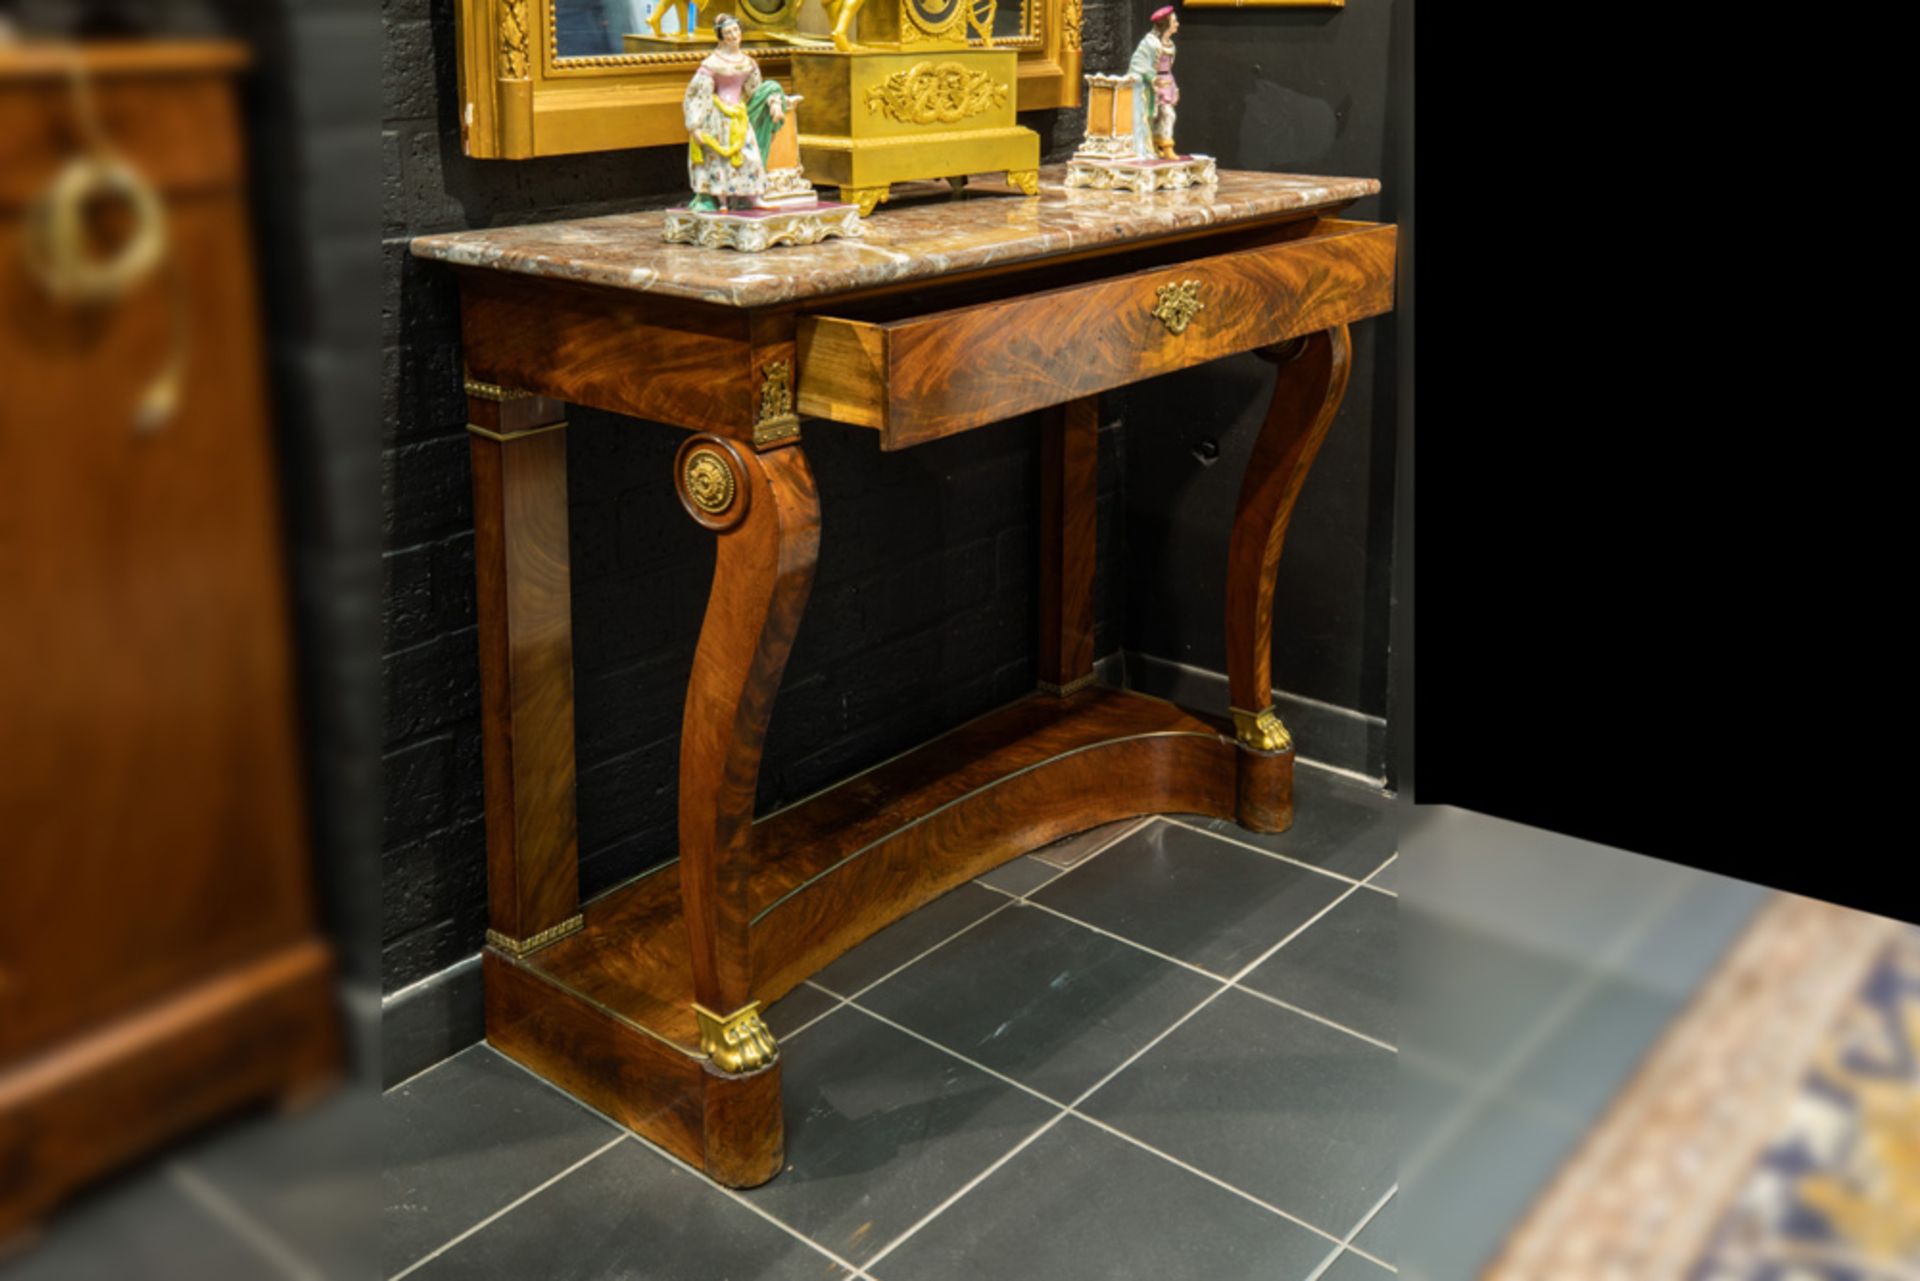 early 19th Cent. Empire style console in mahogany with ornaments in gilded bronze - with a drawer